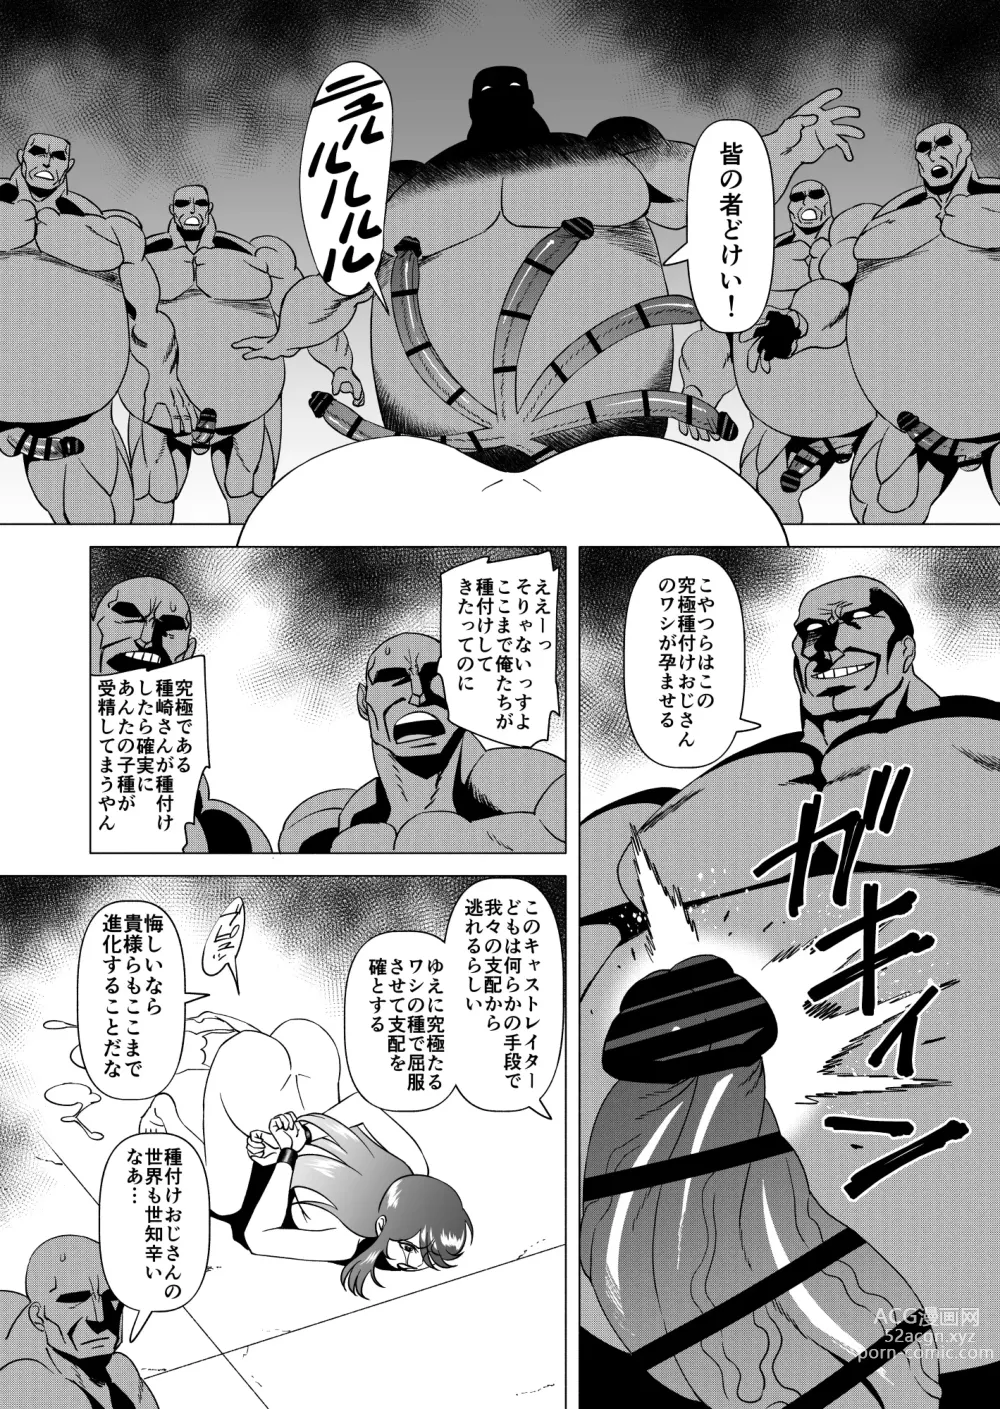 Page 11 of doujinshi CASTRATER 4